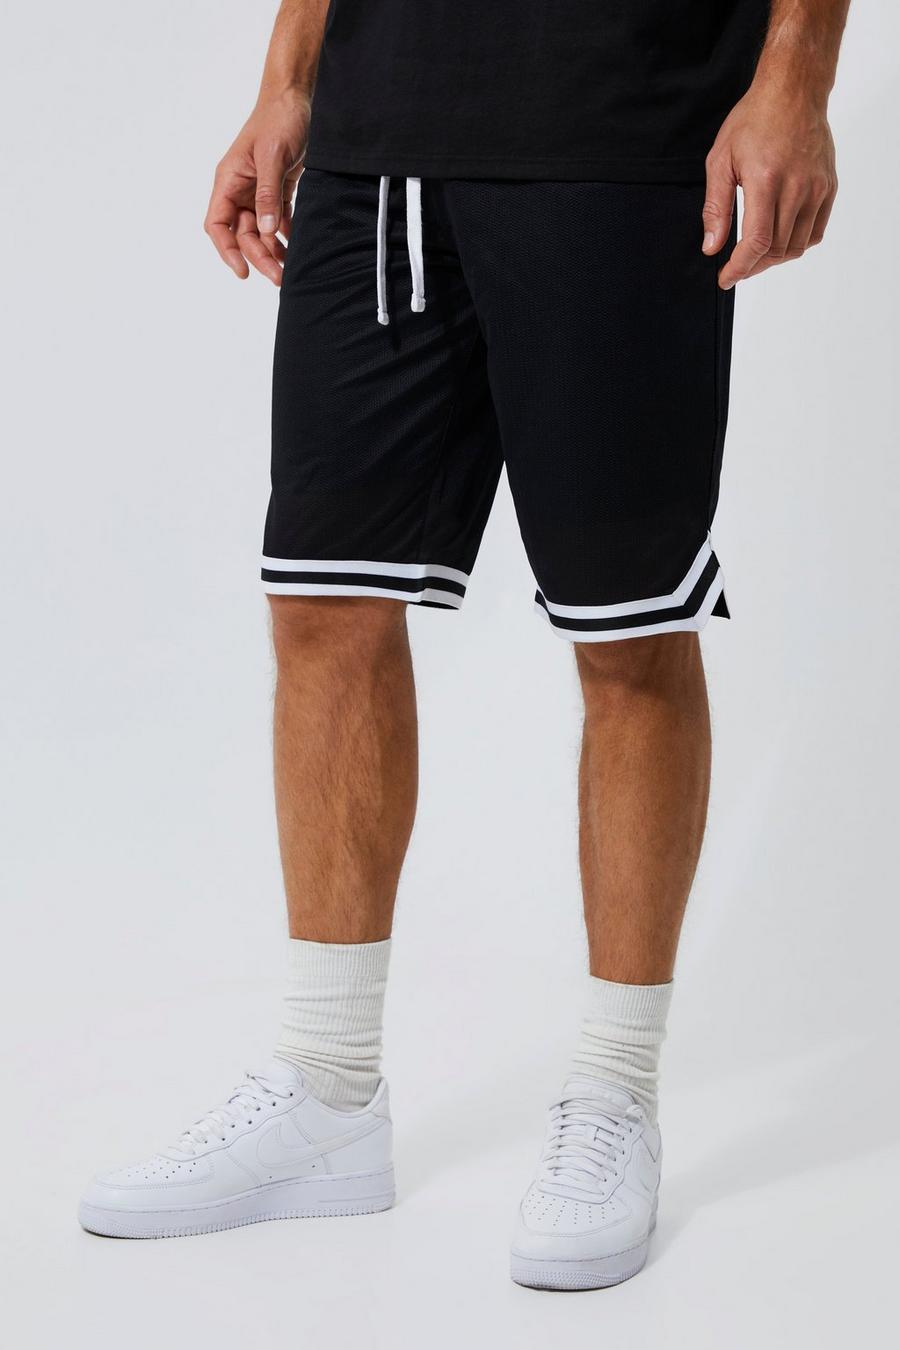 Black Tall Mesh Basketball Shorts With Tape